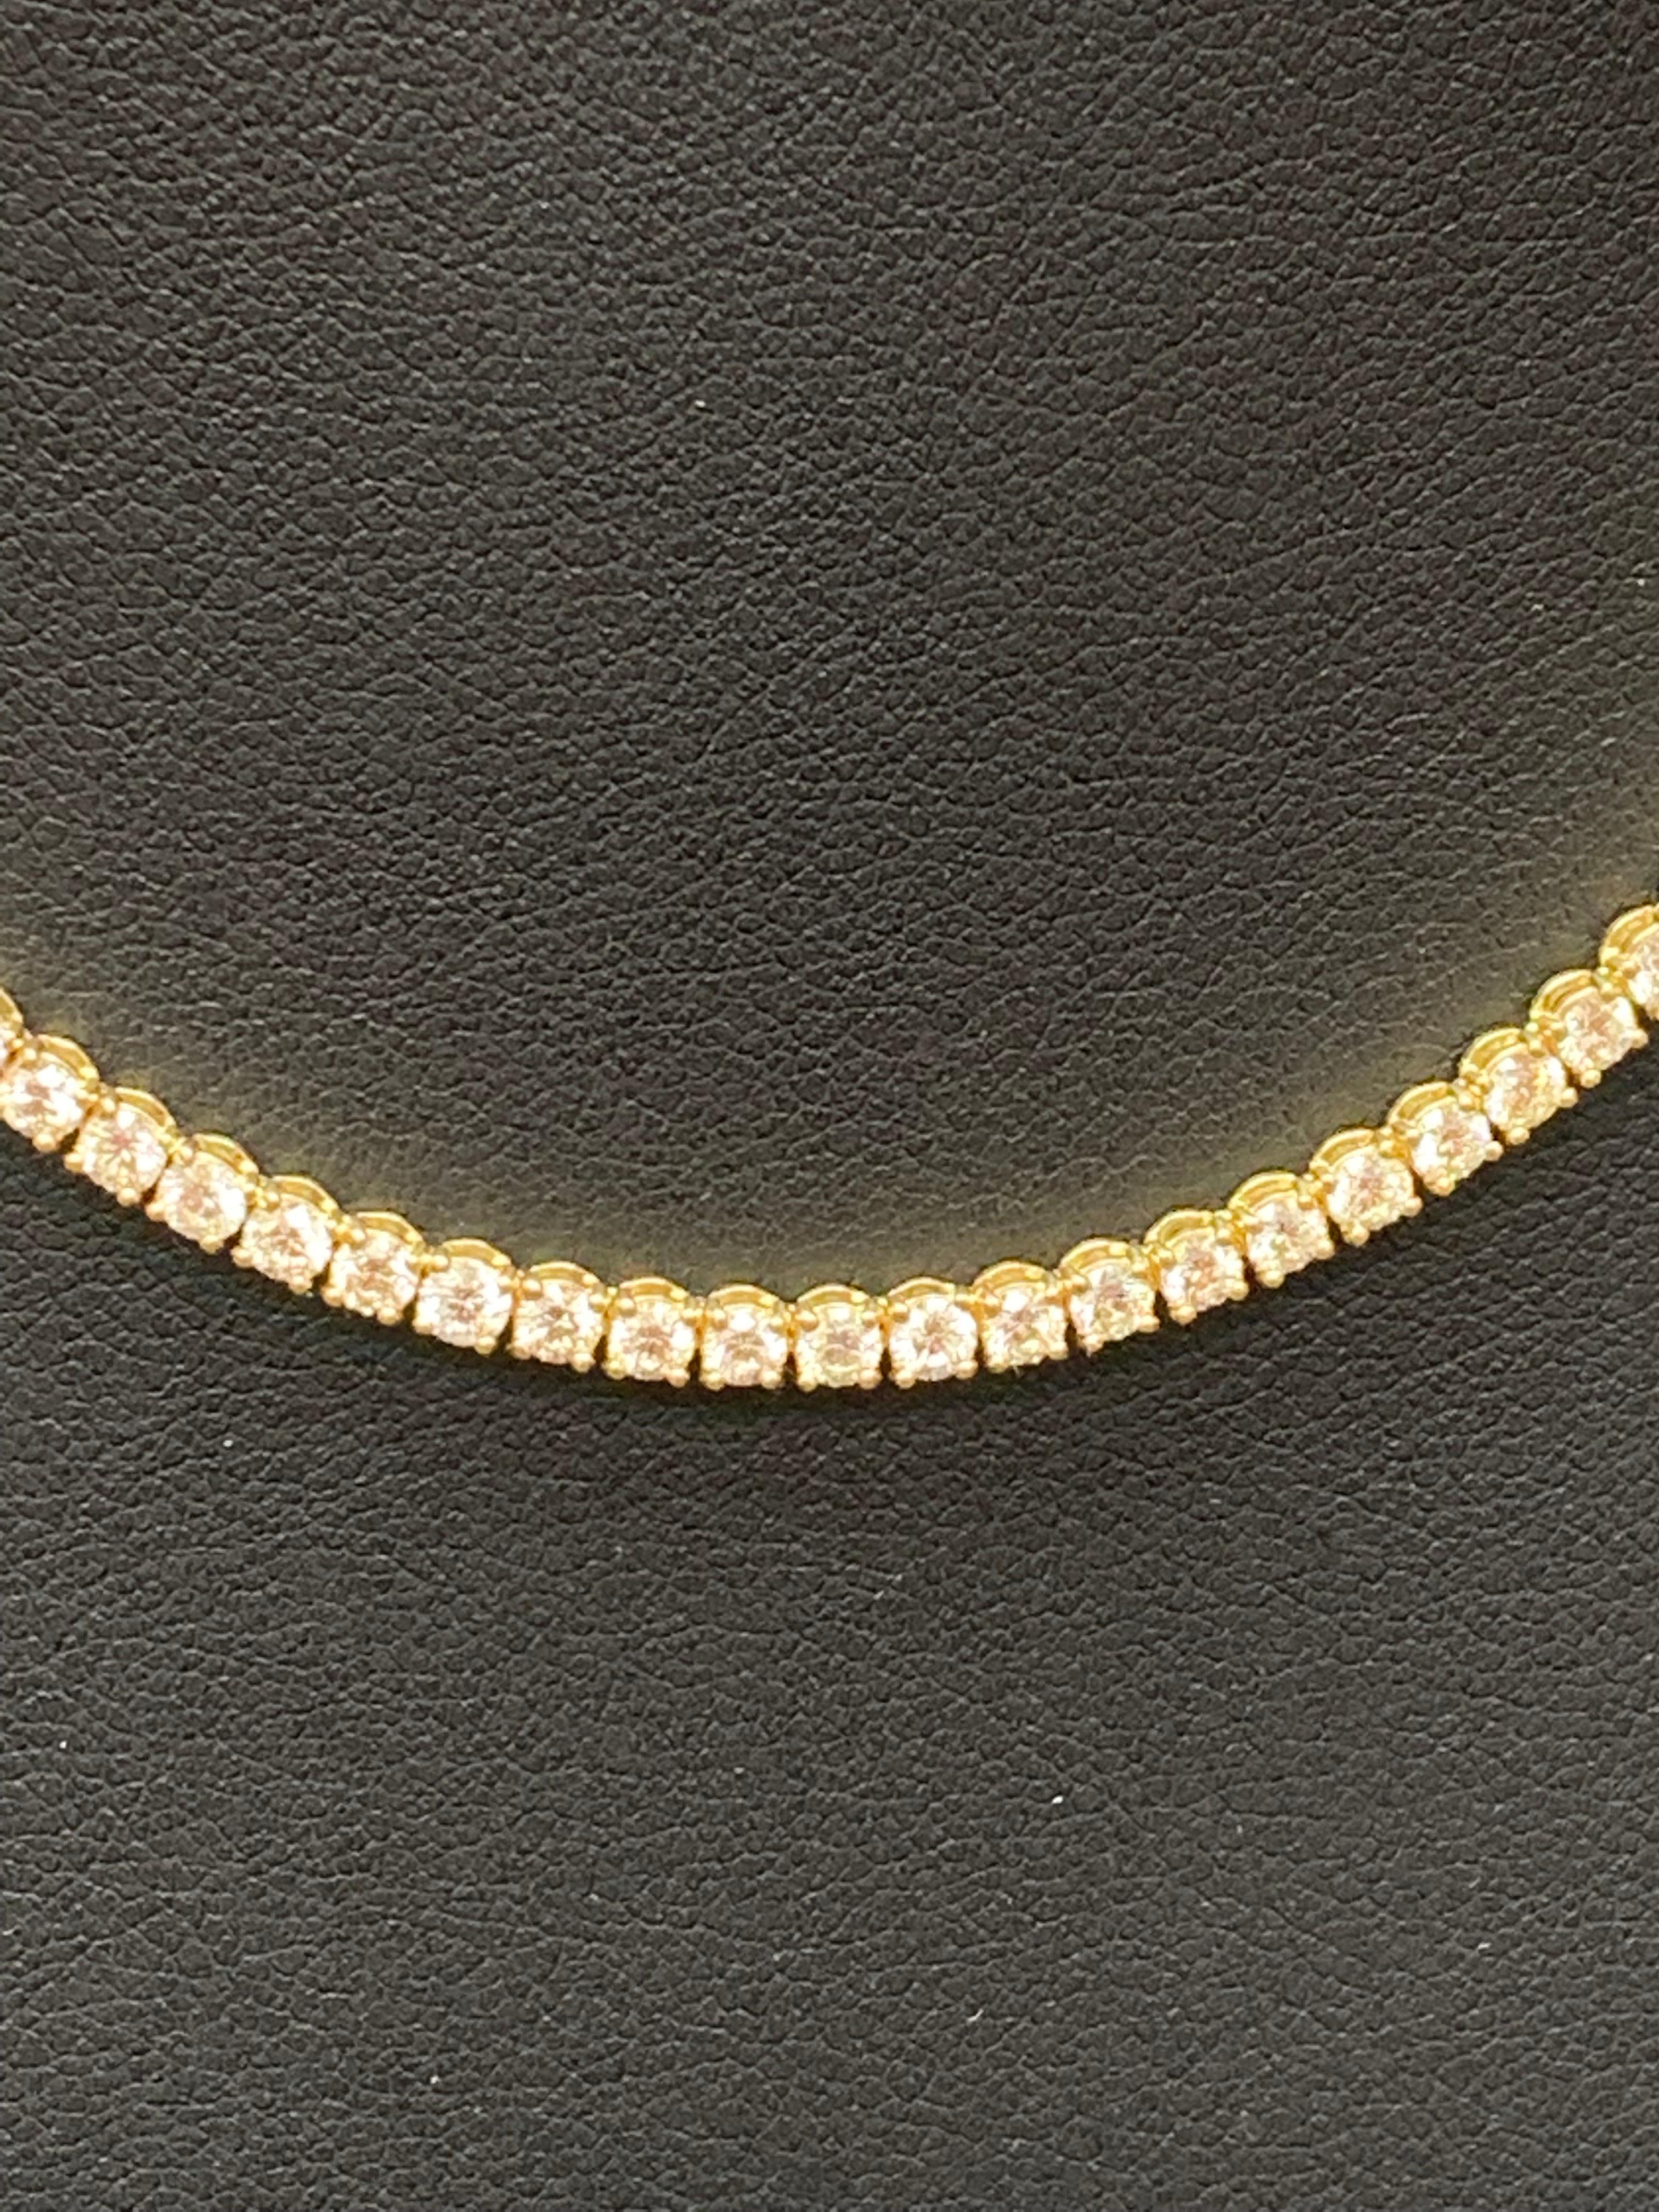 Brilliant Cut 8.37 Carat Diamond Tennis Necklace in 14K Yellow Gold For Sale